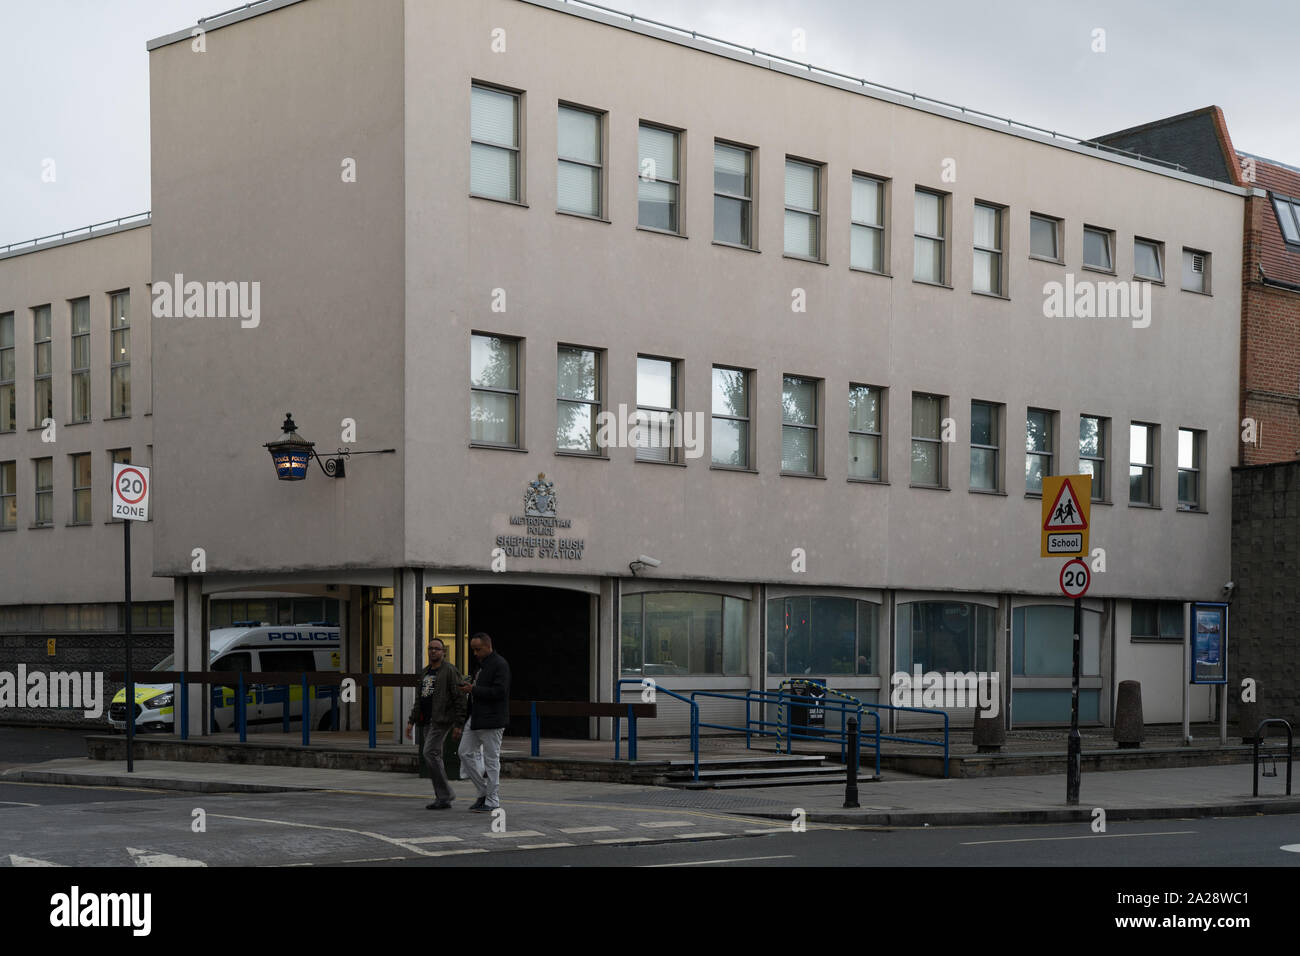 Views of Shepherds Bush police station in London. Photo date: Tuesday, October 1, 2019. Photo: Roger Garfield/Alamy Stock Photo